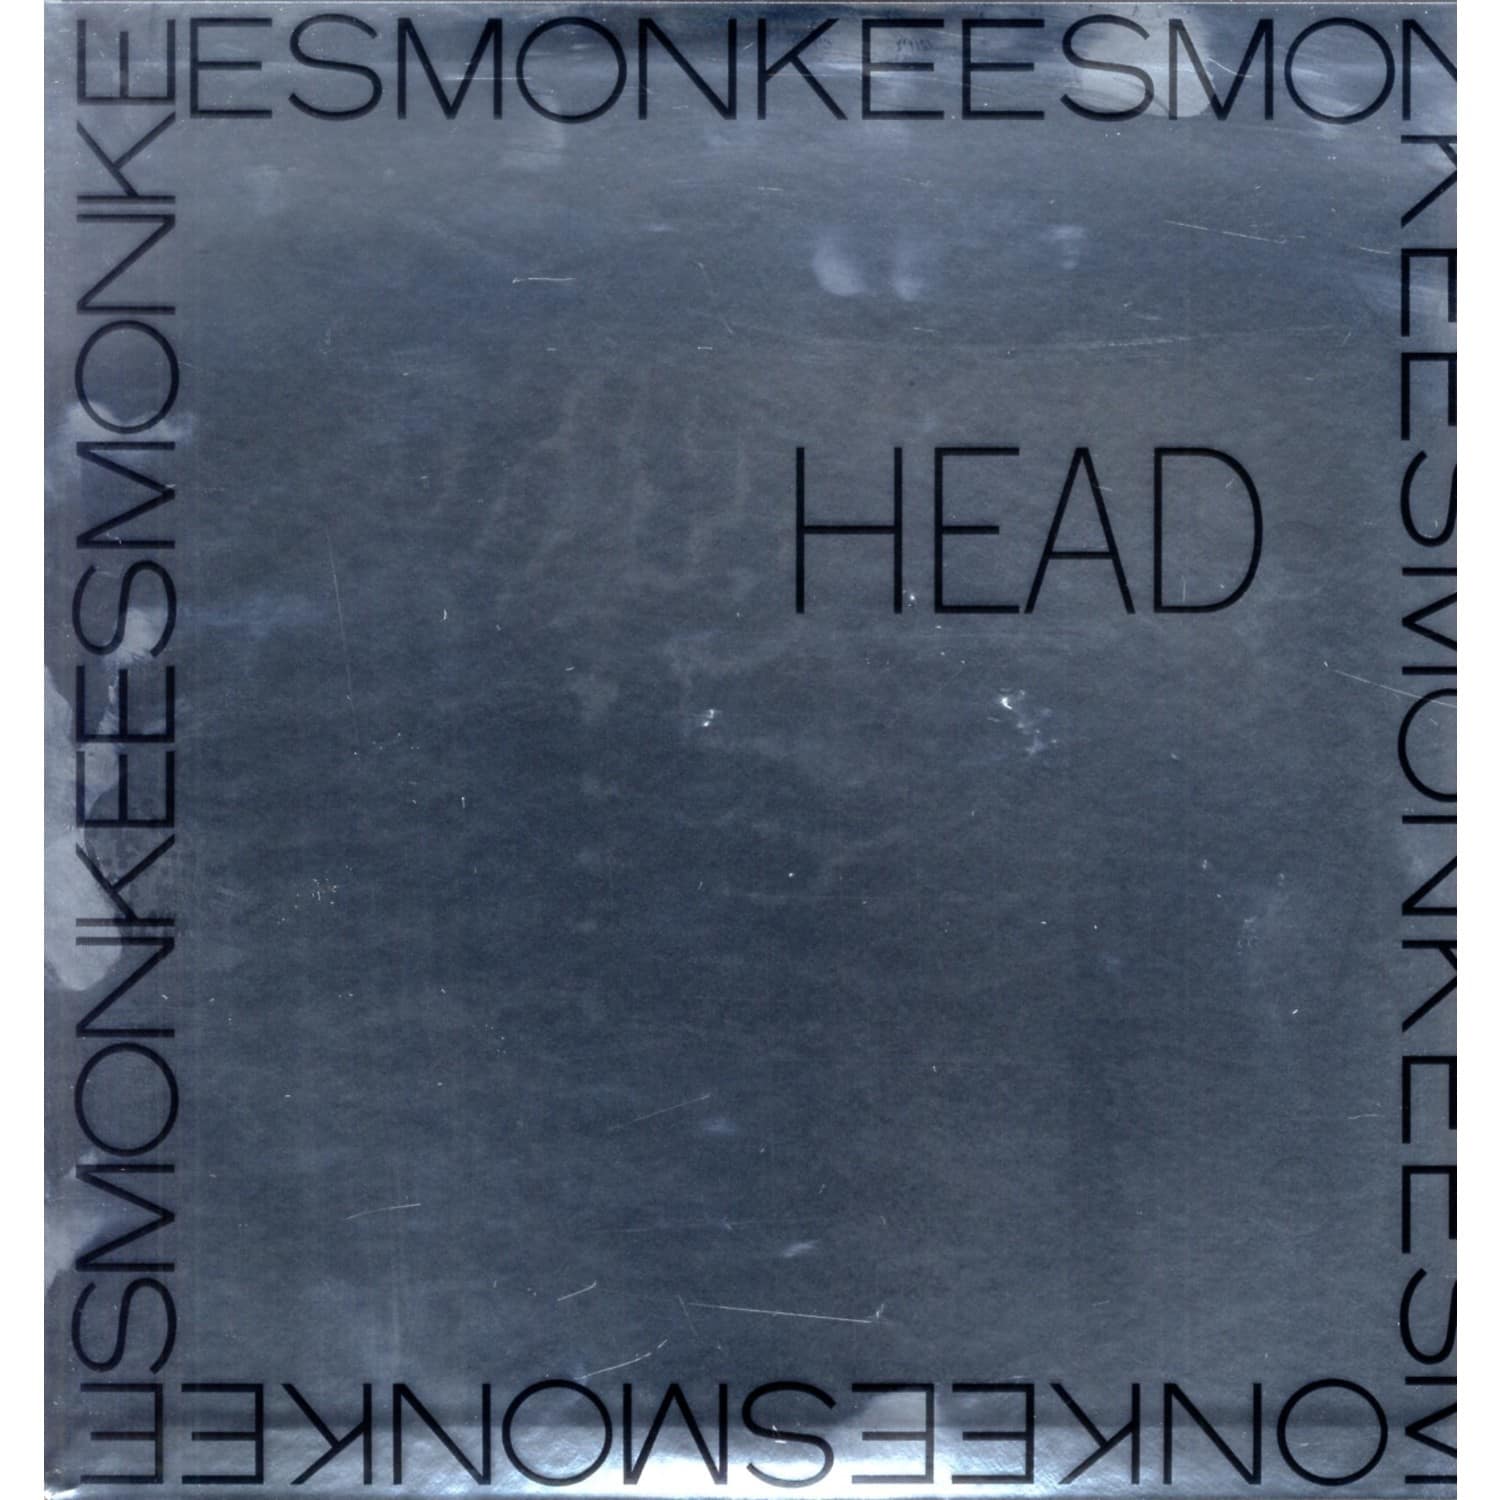 The OST/Monkees - HEAD 